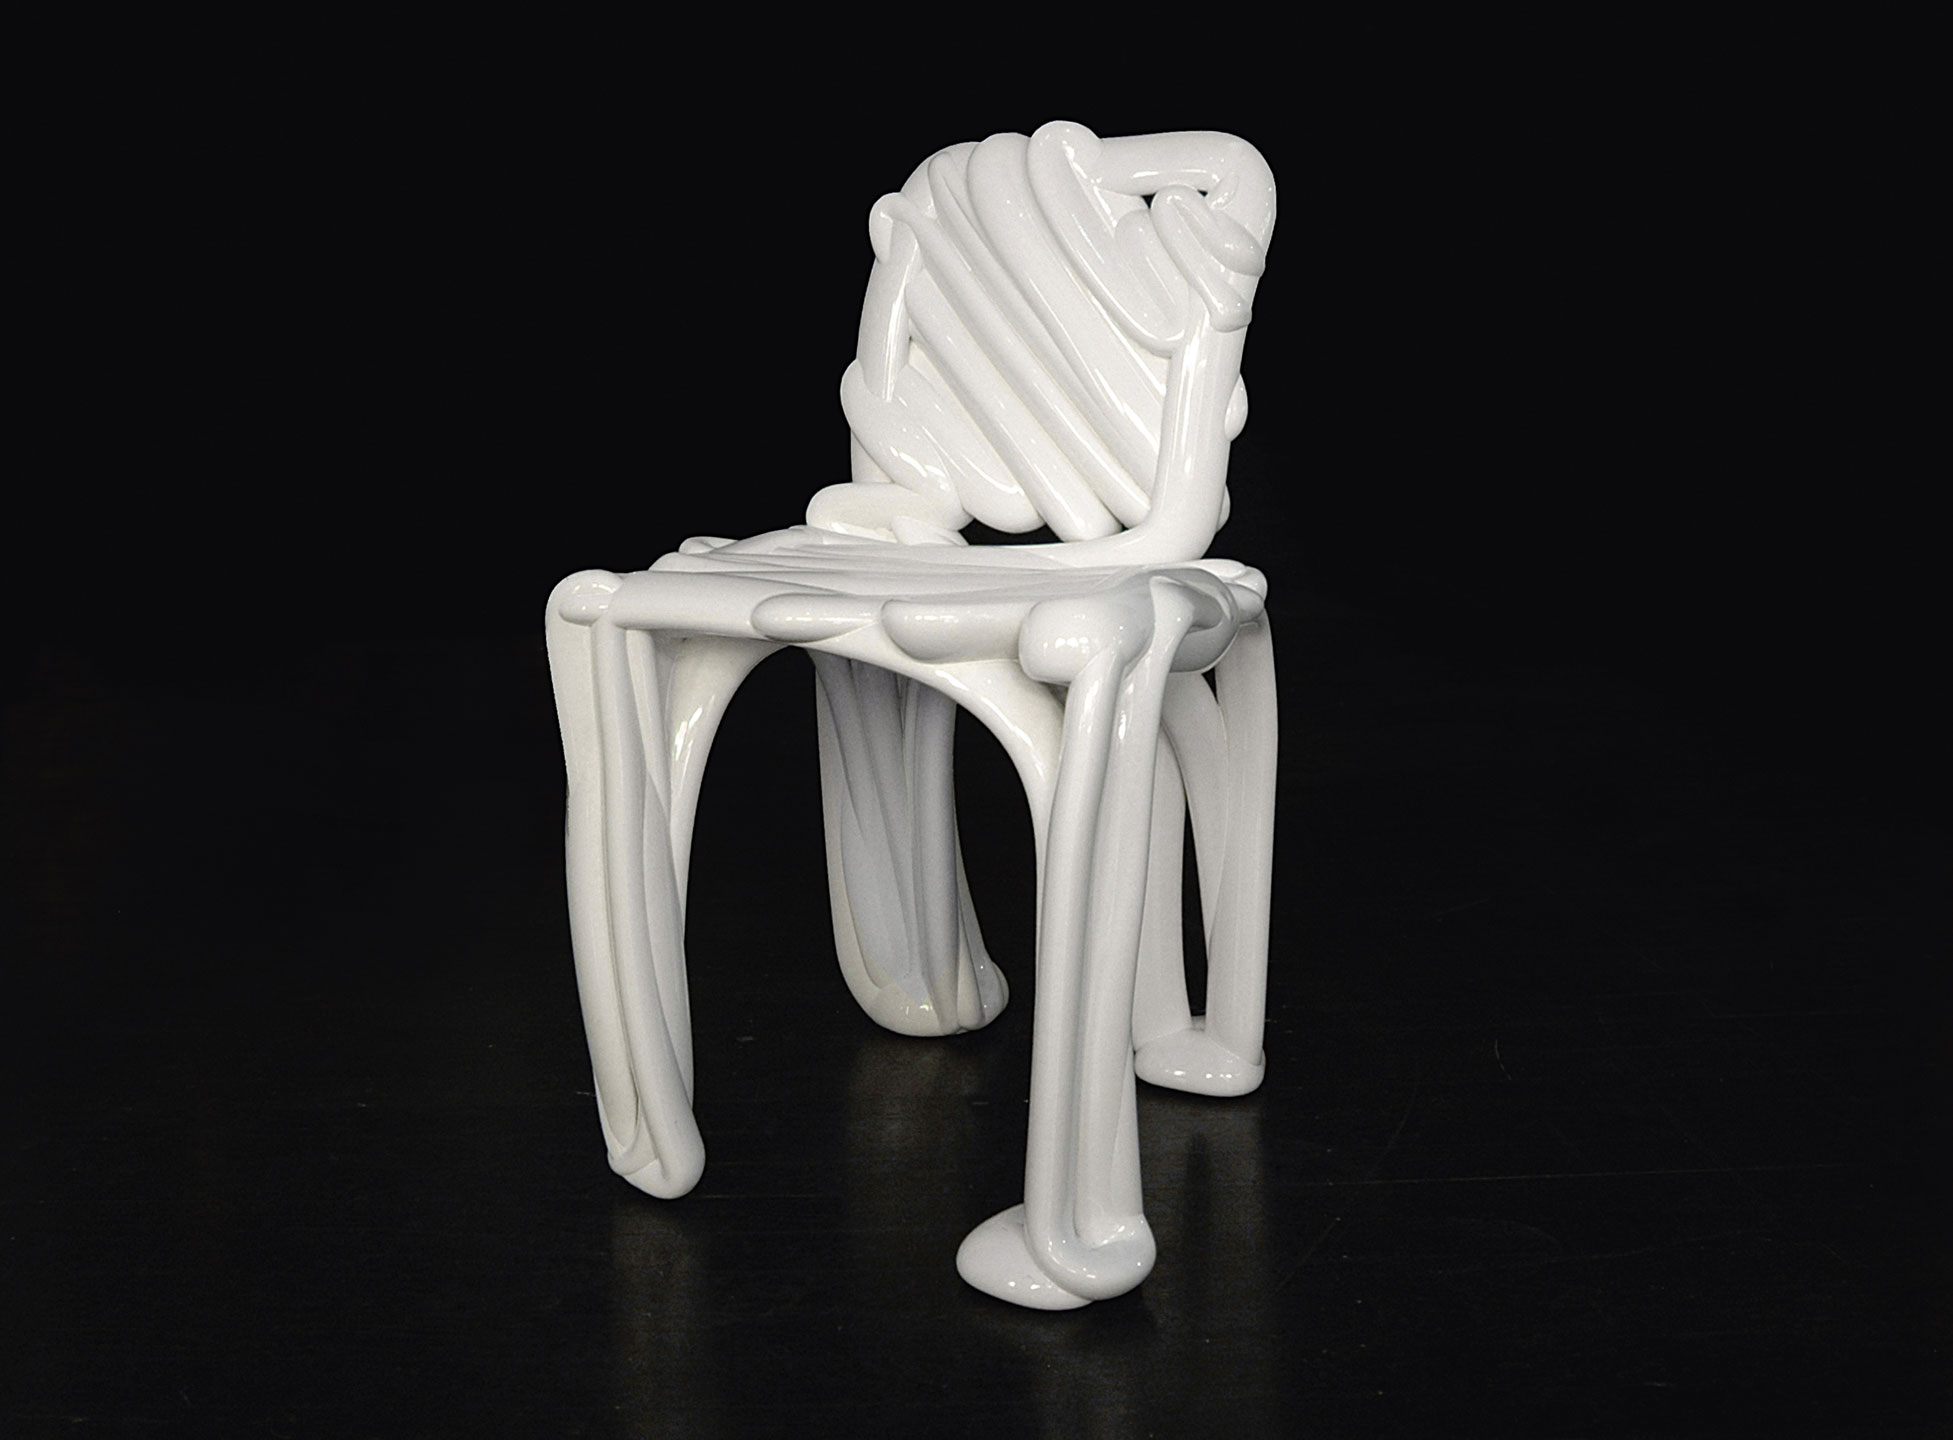 The Sketch Chair by the all female Front Design - featured in Chair: 500 Designs That Matter